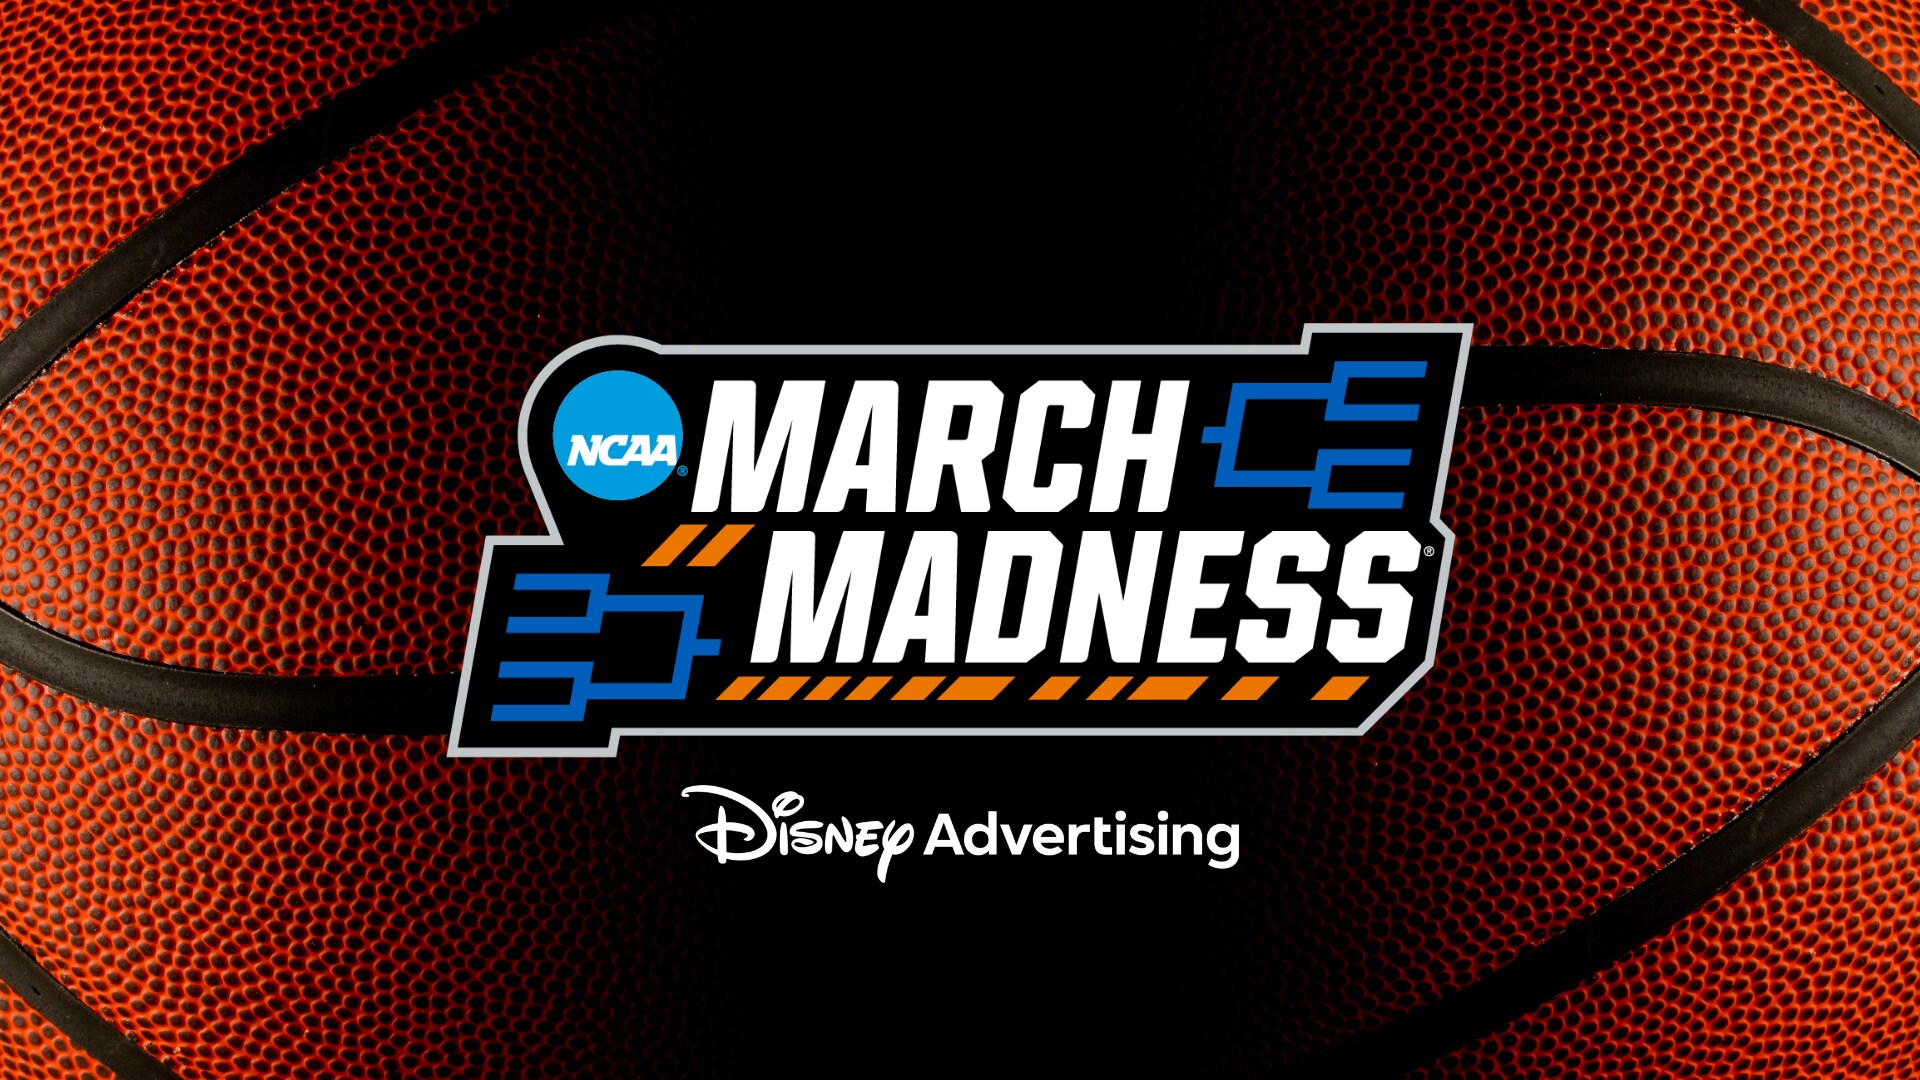 Disney Advertisers Lead Fast Break for Sold Out NCAA DI Women’s Basketball Championship